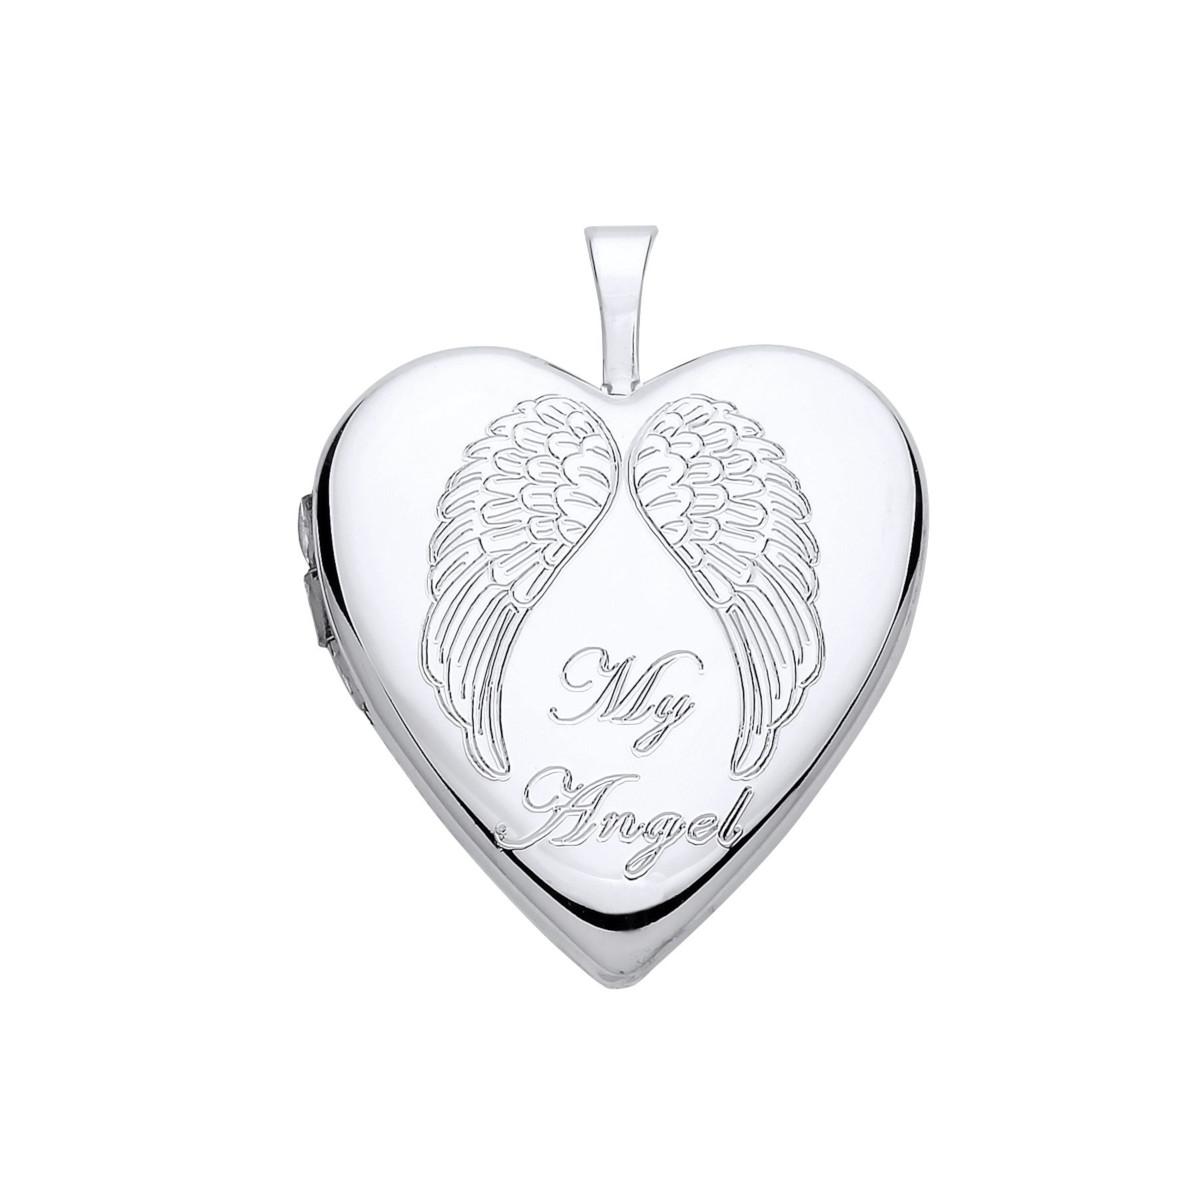 silver heart locket engraved with angel wings and text